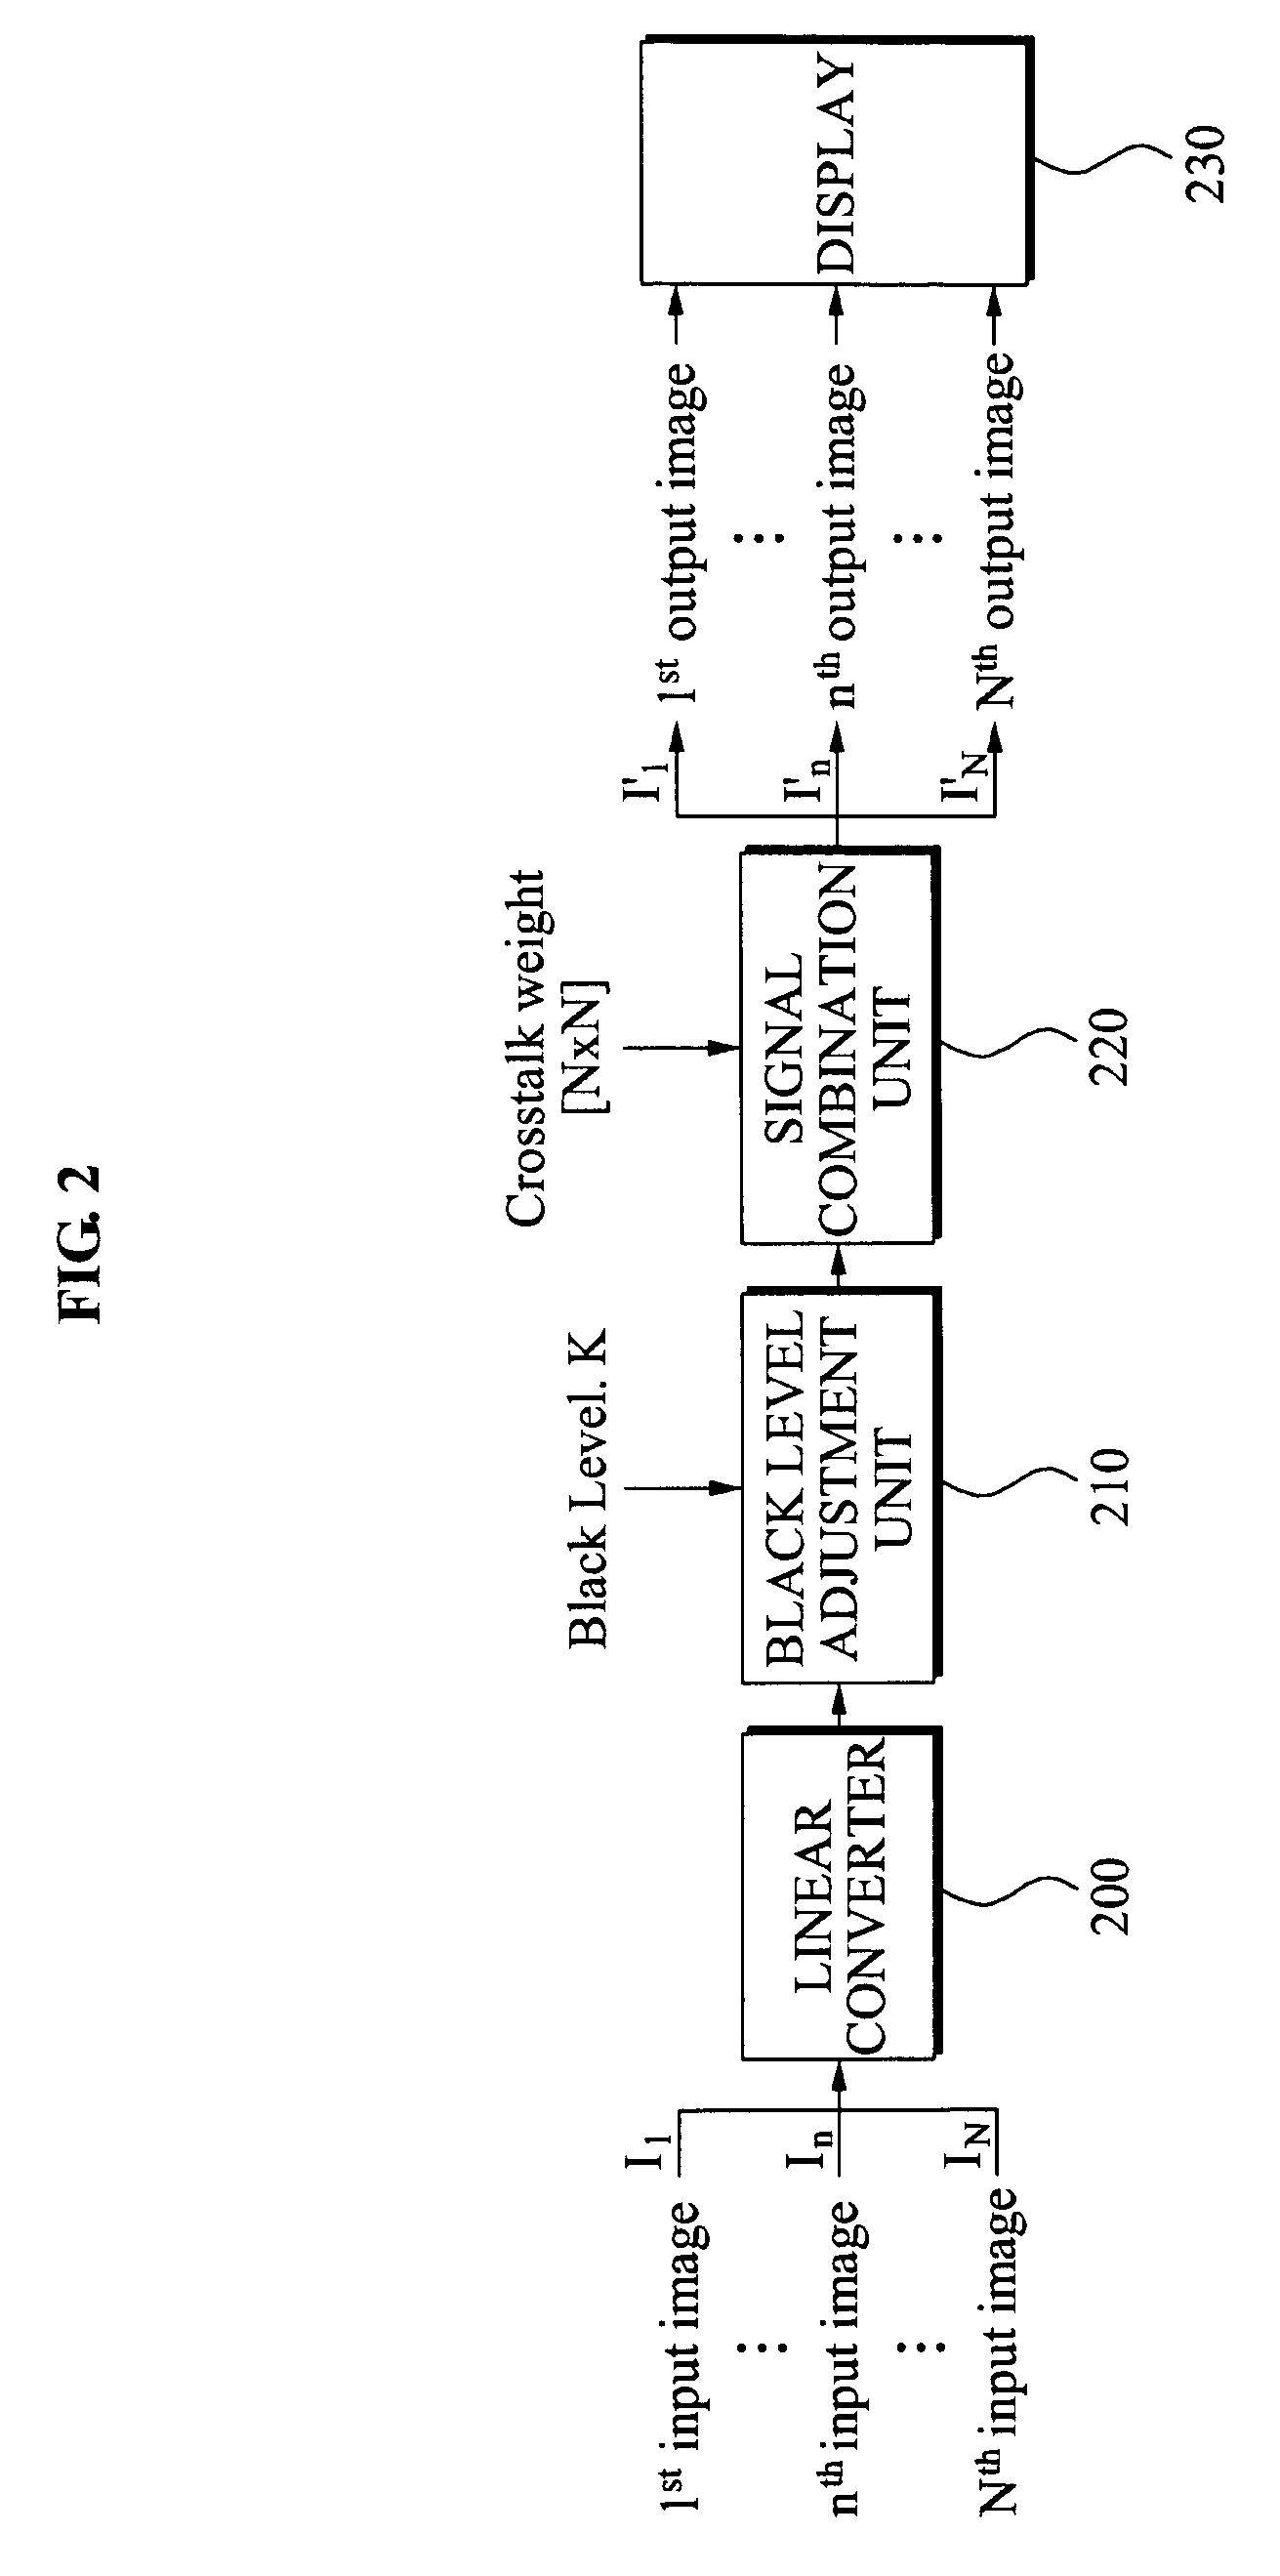 Apparatus and method for compensating for crosstalk between views in three dimensional (3D) display apparatus